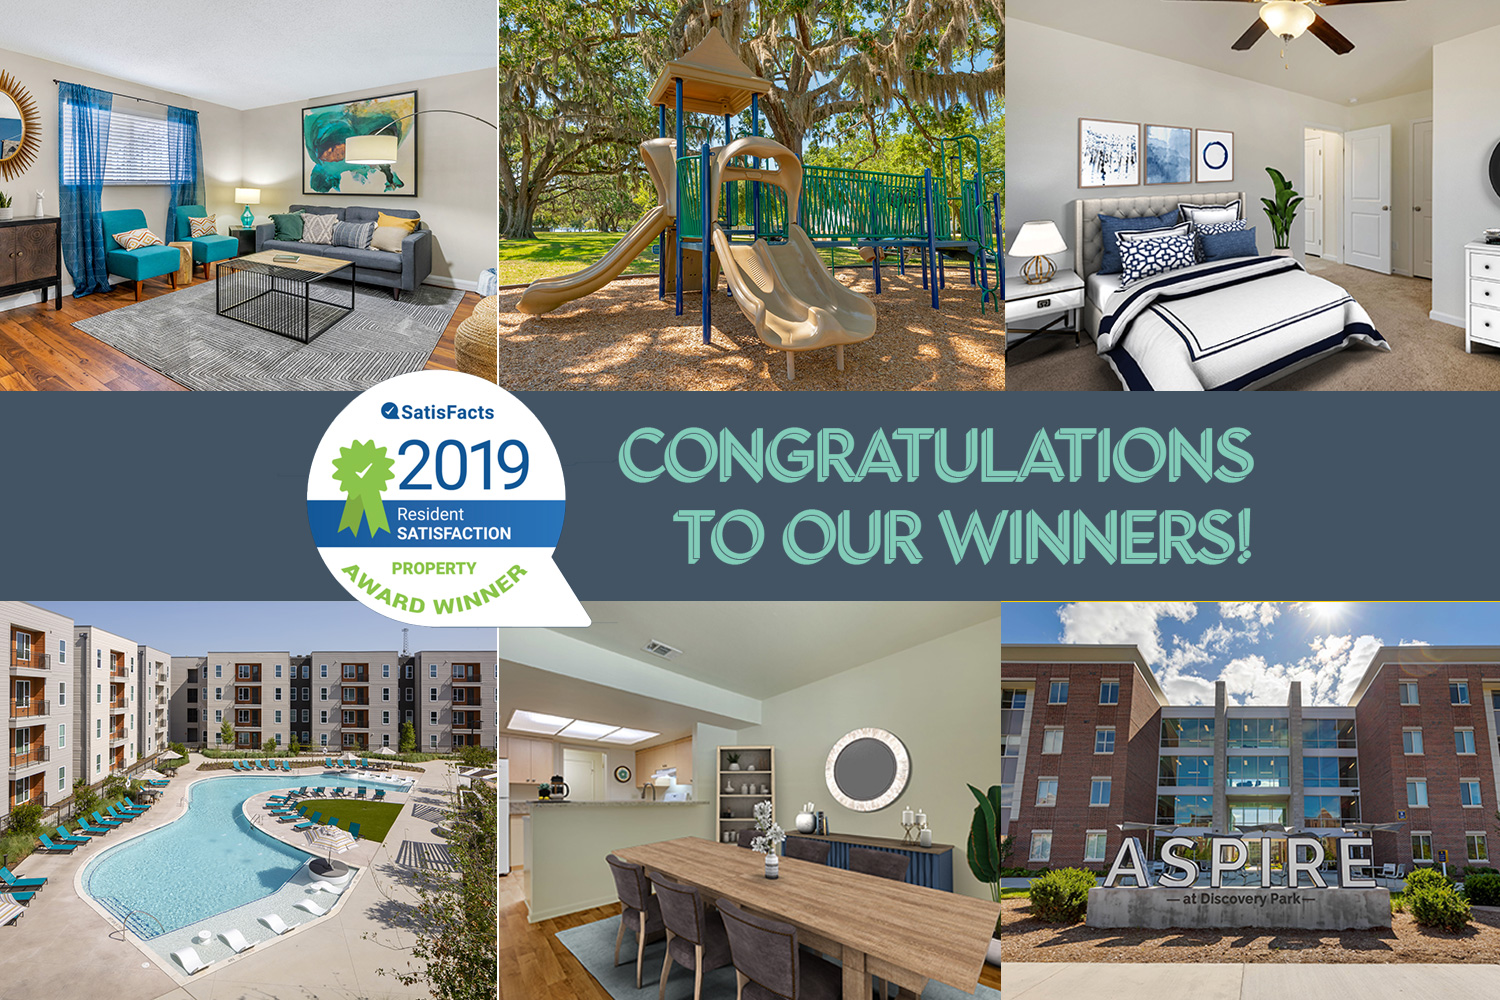 Balfour Beatty Communities military, multifamily and student properties recognized for resident satisfaction in 2019